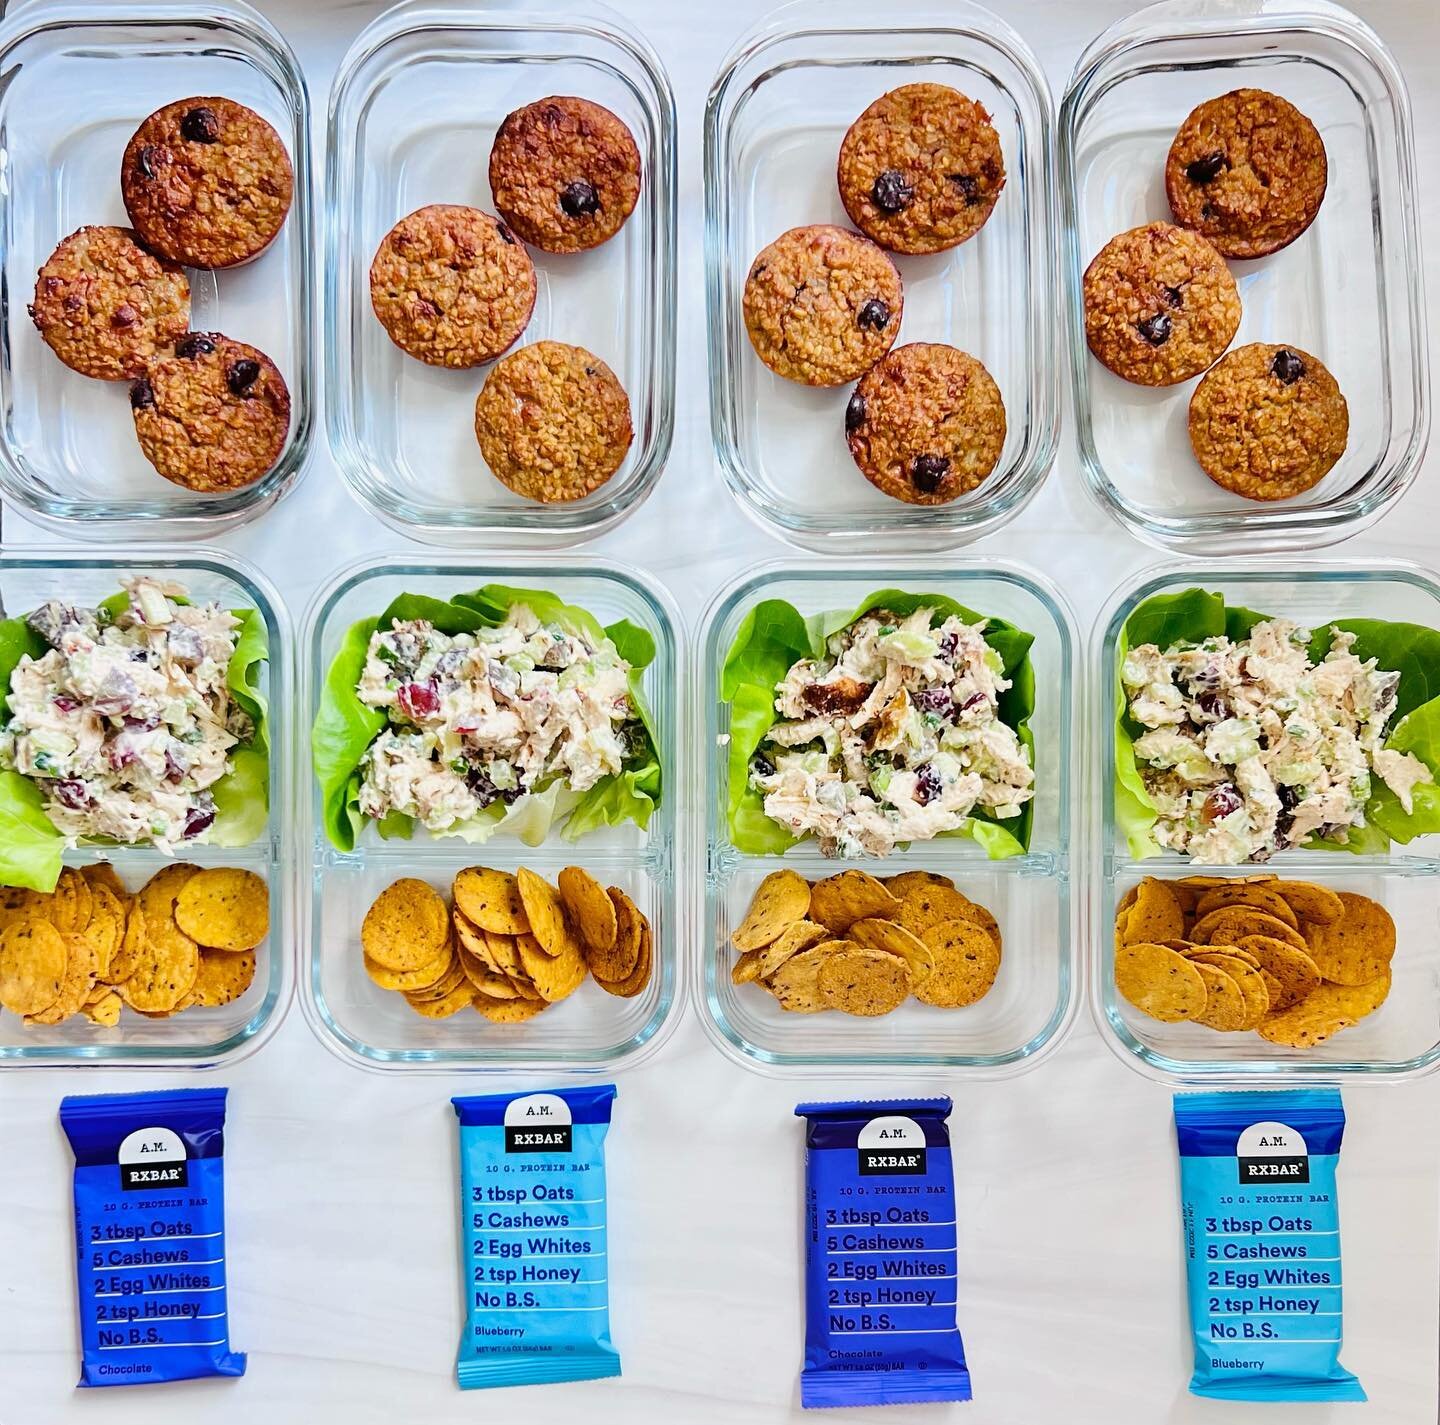 Happy Meal Prep Sunday!

Breakfast: Baked Oatmeal Bites

Lunch: Chicken Salad

Snack: @rxbar 

Want the recipes for this meal plan and a full grocery list for the week?

Get it all by becoming a paid subscriber to my newsletter!

For just $6 a month,